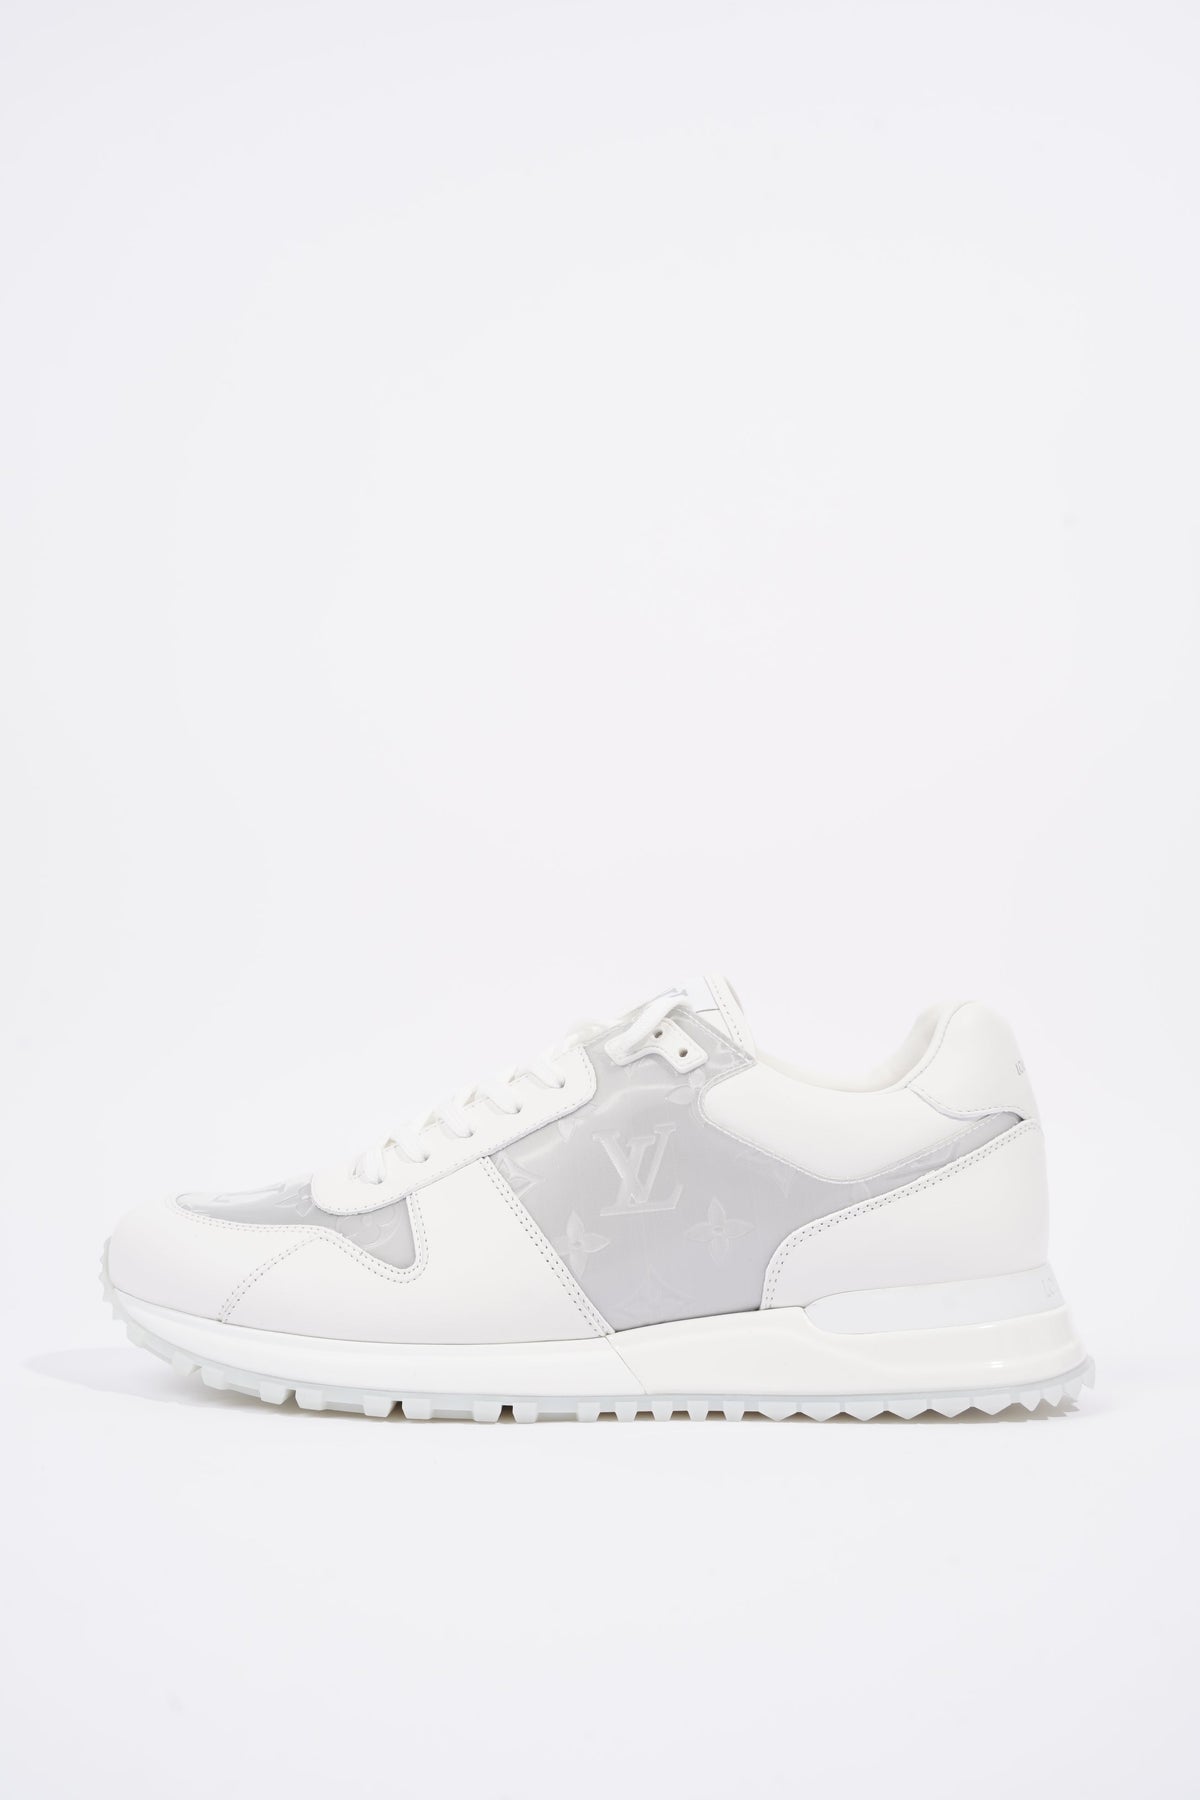 Louis Vuitton Mens Runaway Trainers White EU 41.5 / UK 7.5 – Luxe Collective